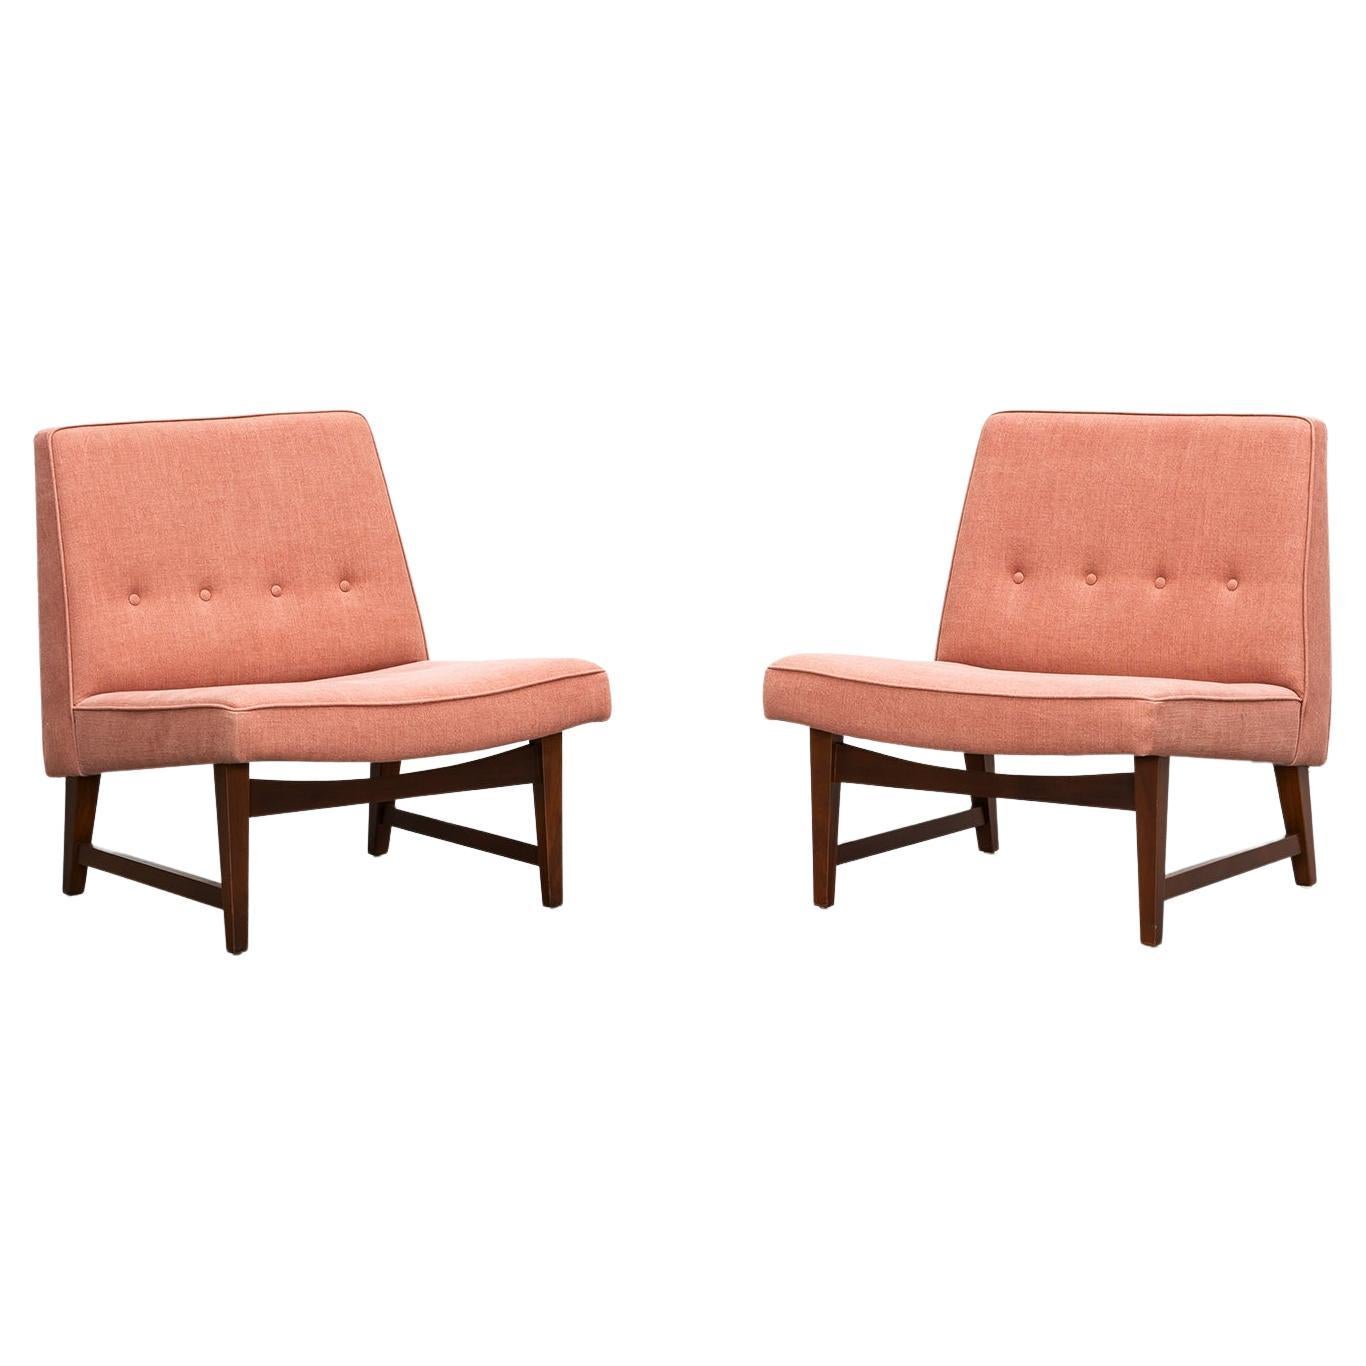 1950s Warm Pink Edward Wormley pair of Lounge Chairs 'New Upholstery' For Sale